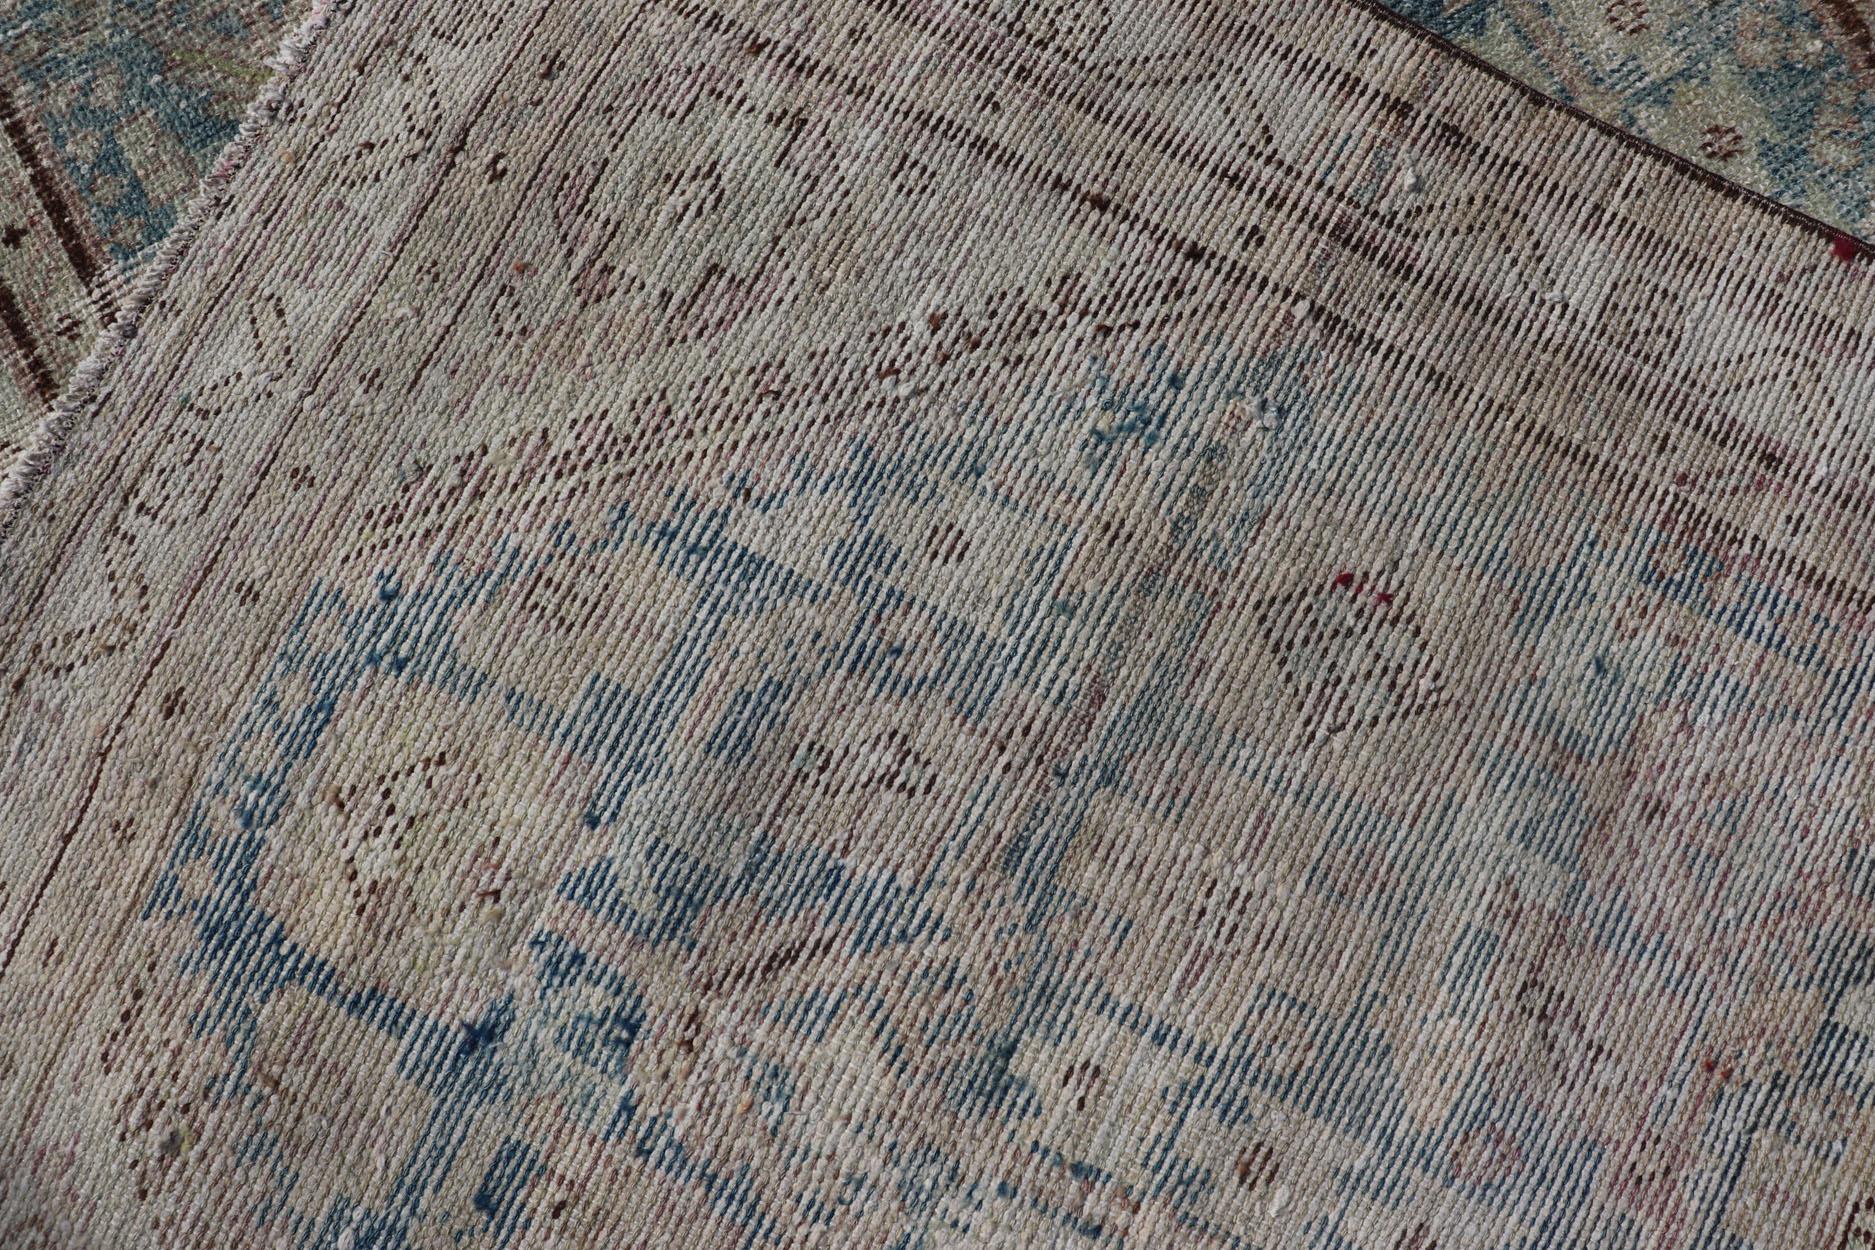 Antique Persian Hamedan Runner with Sub-Geometric Design in Blues and Neutrals  For Sale 5